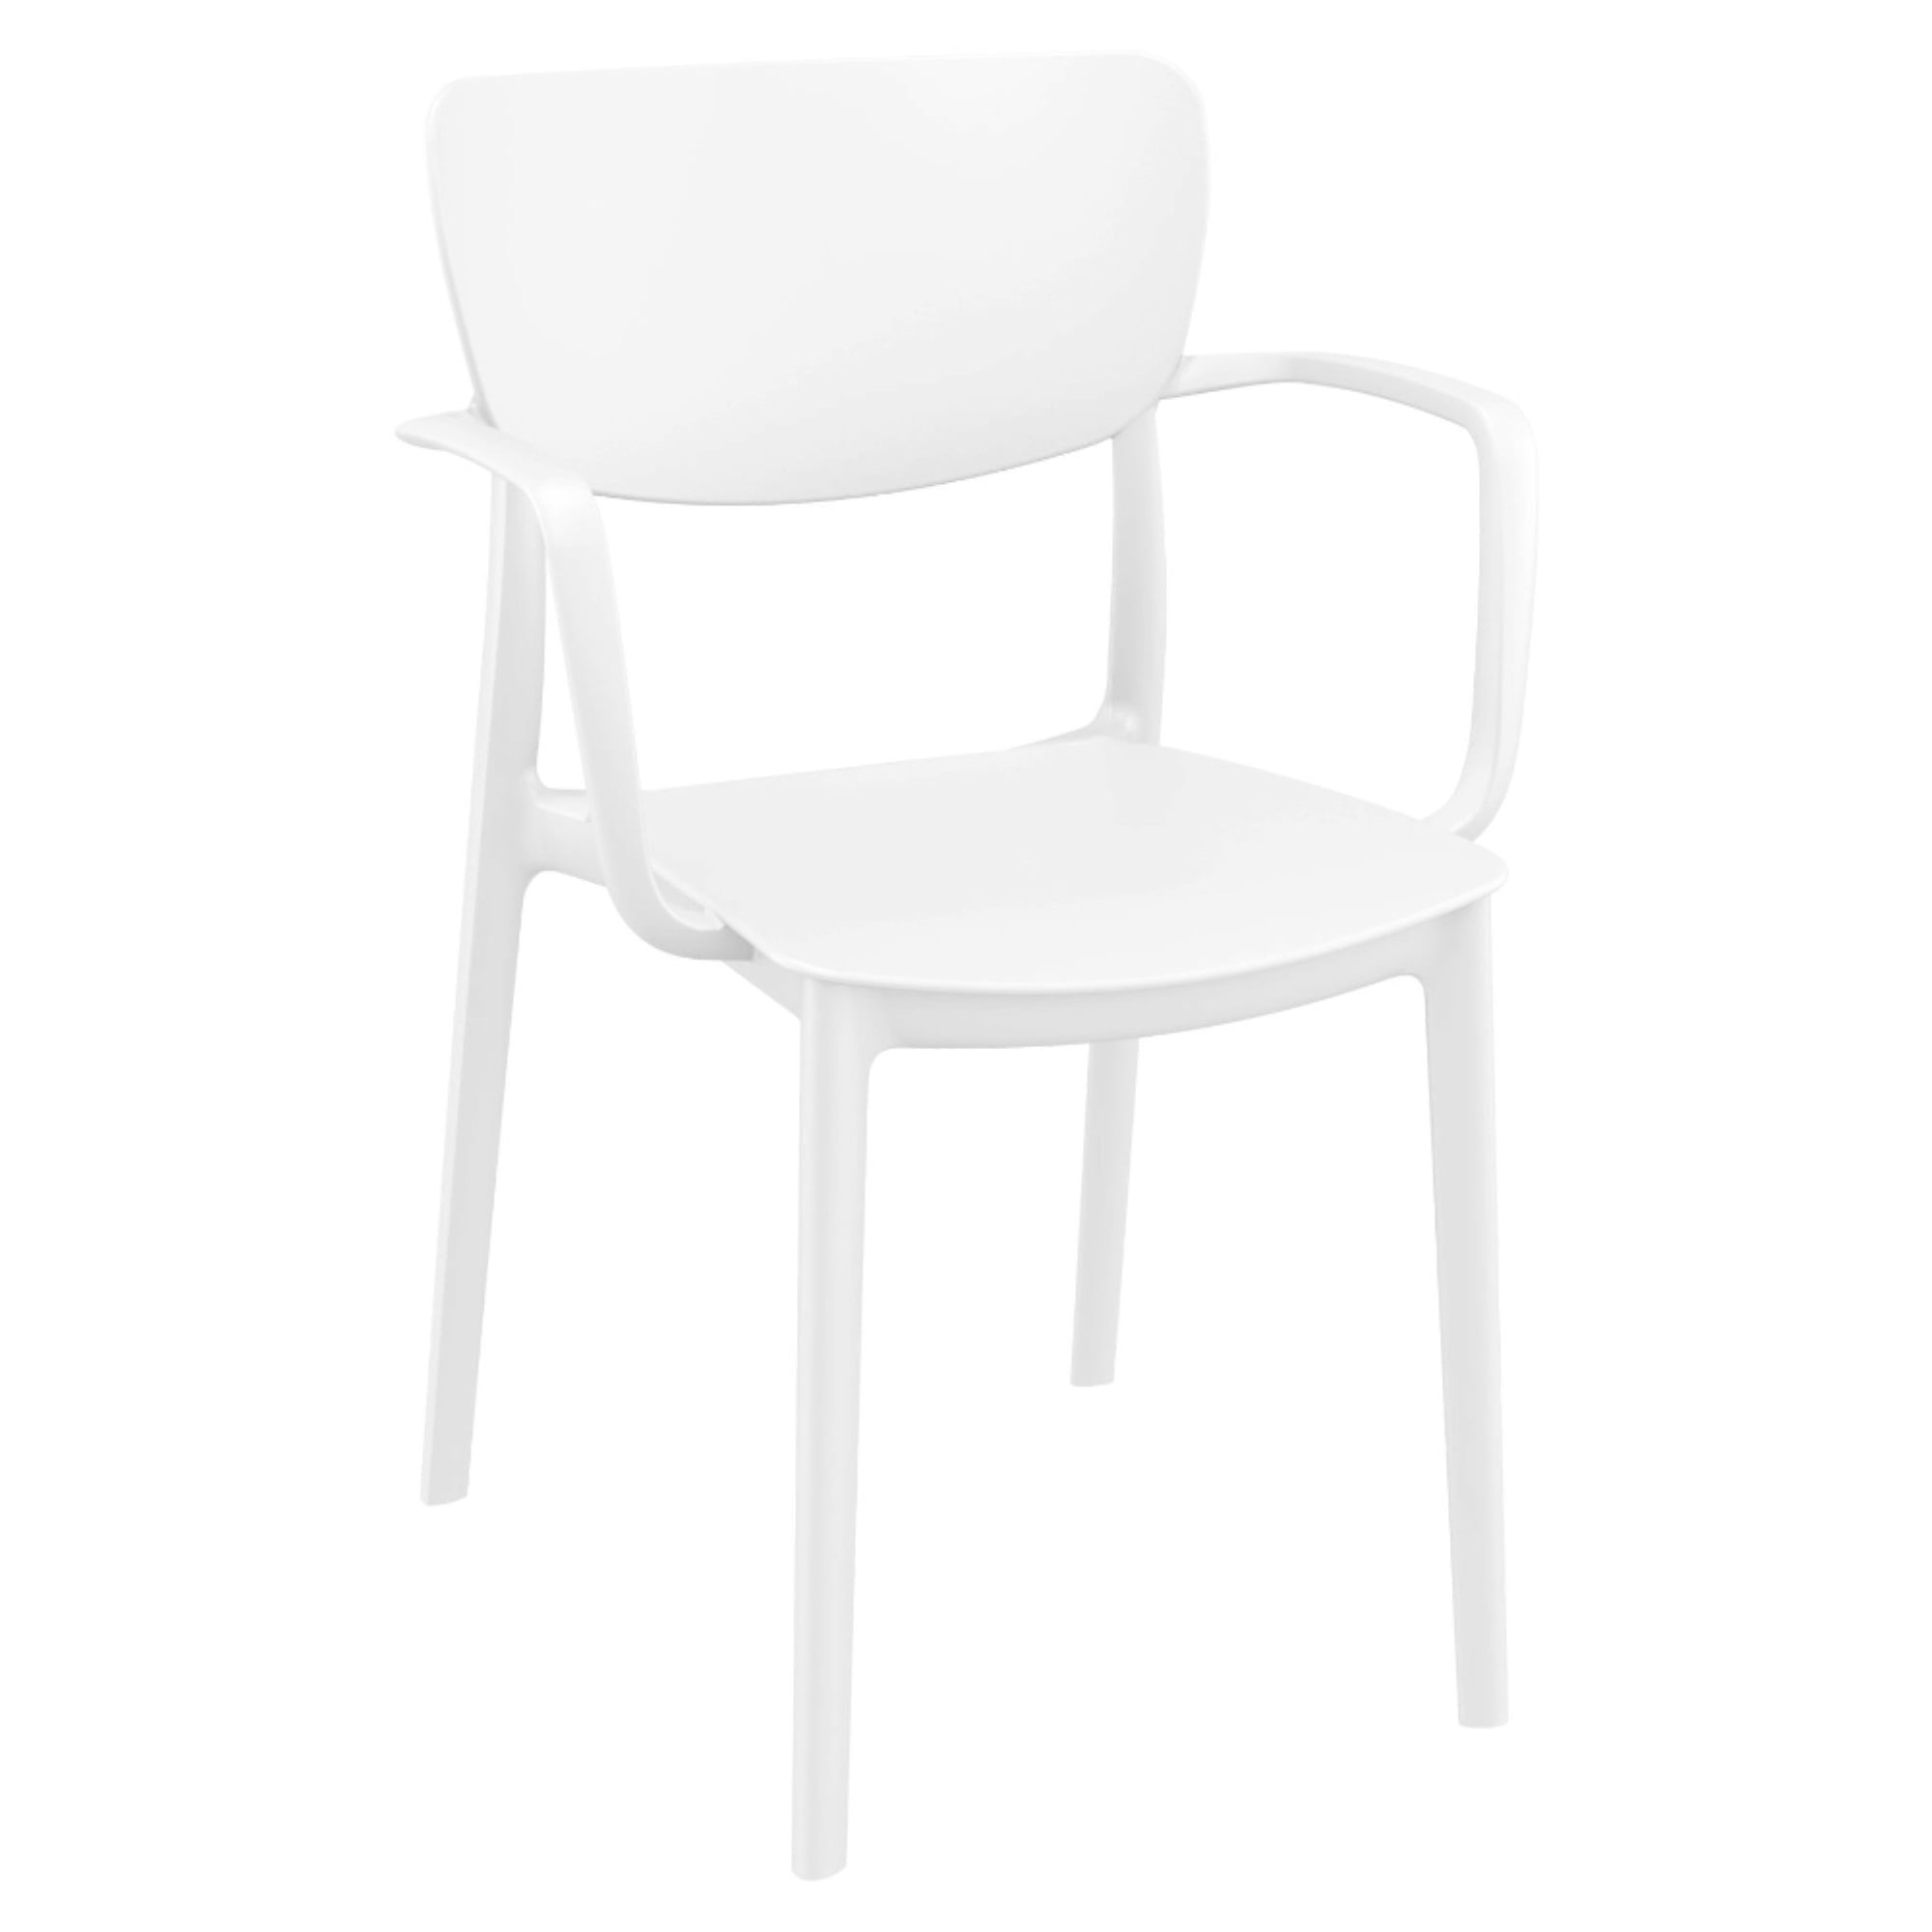 Compamia ISP126-WHI 32.3 x 17.7 x 21 in. Lisa Outdoor Dining Arm Chair White -  set of 2